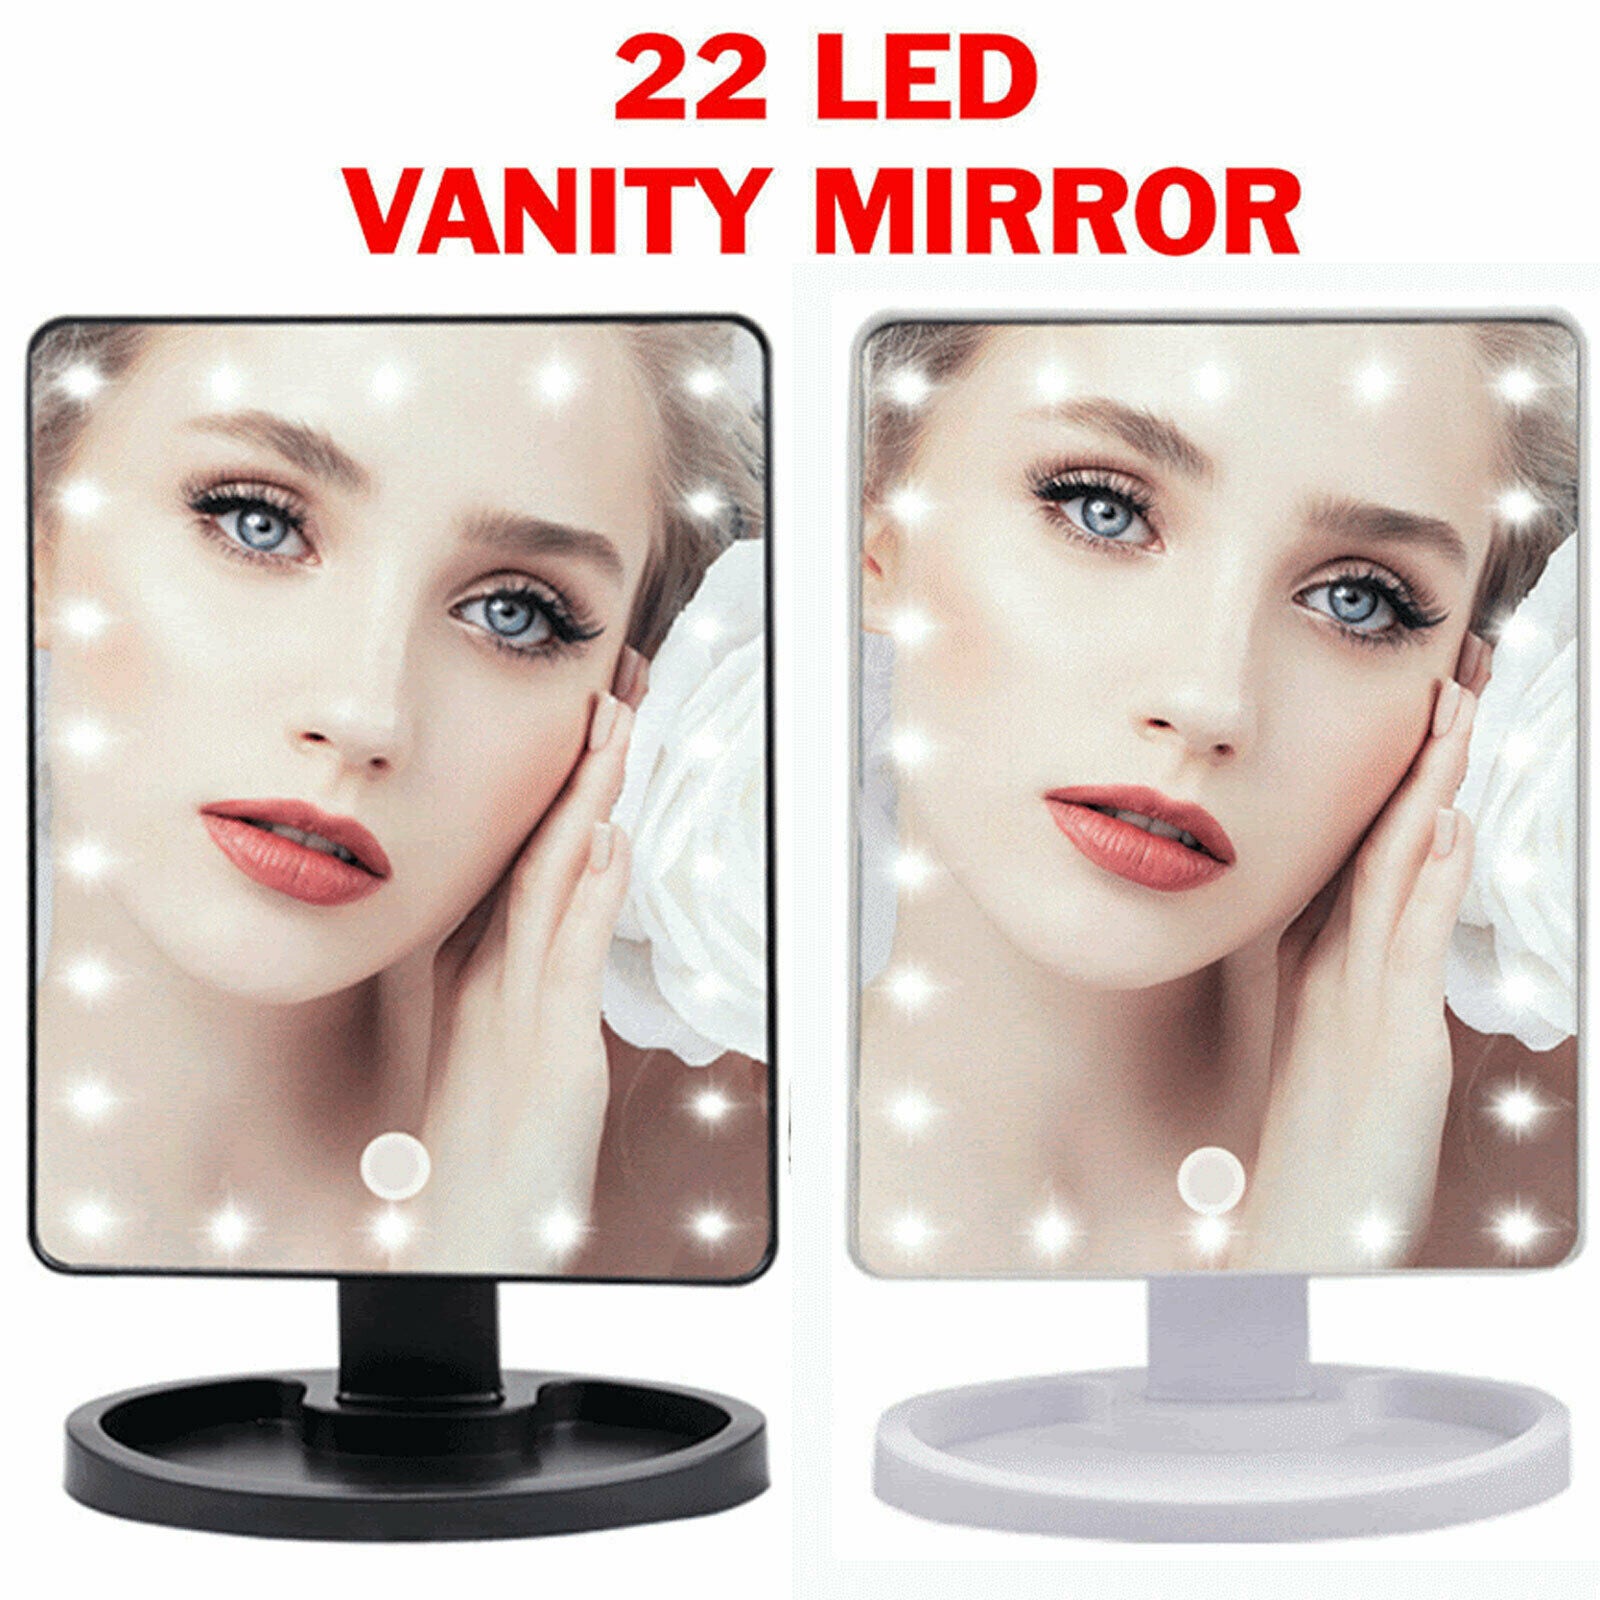 Professional 22 LED Makeup Mirror Light Portable Rotation Vanity - your-beauty-matters